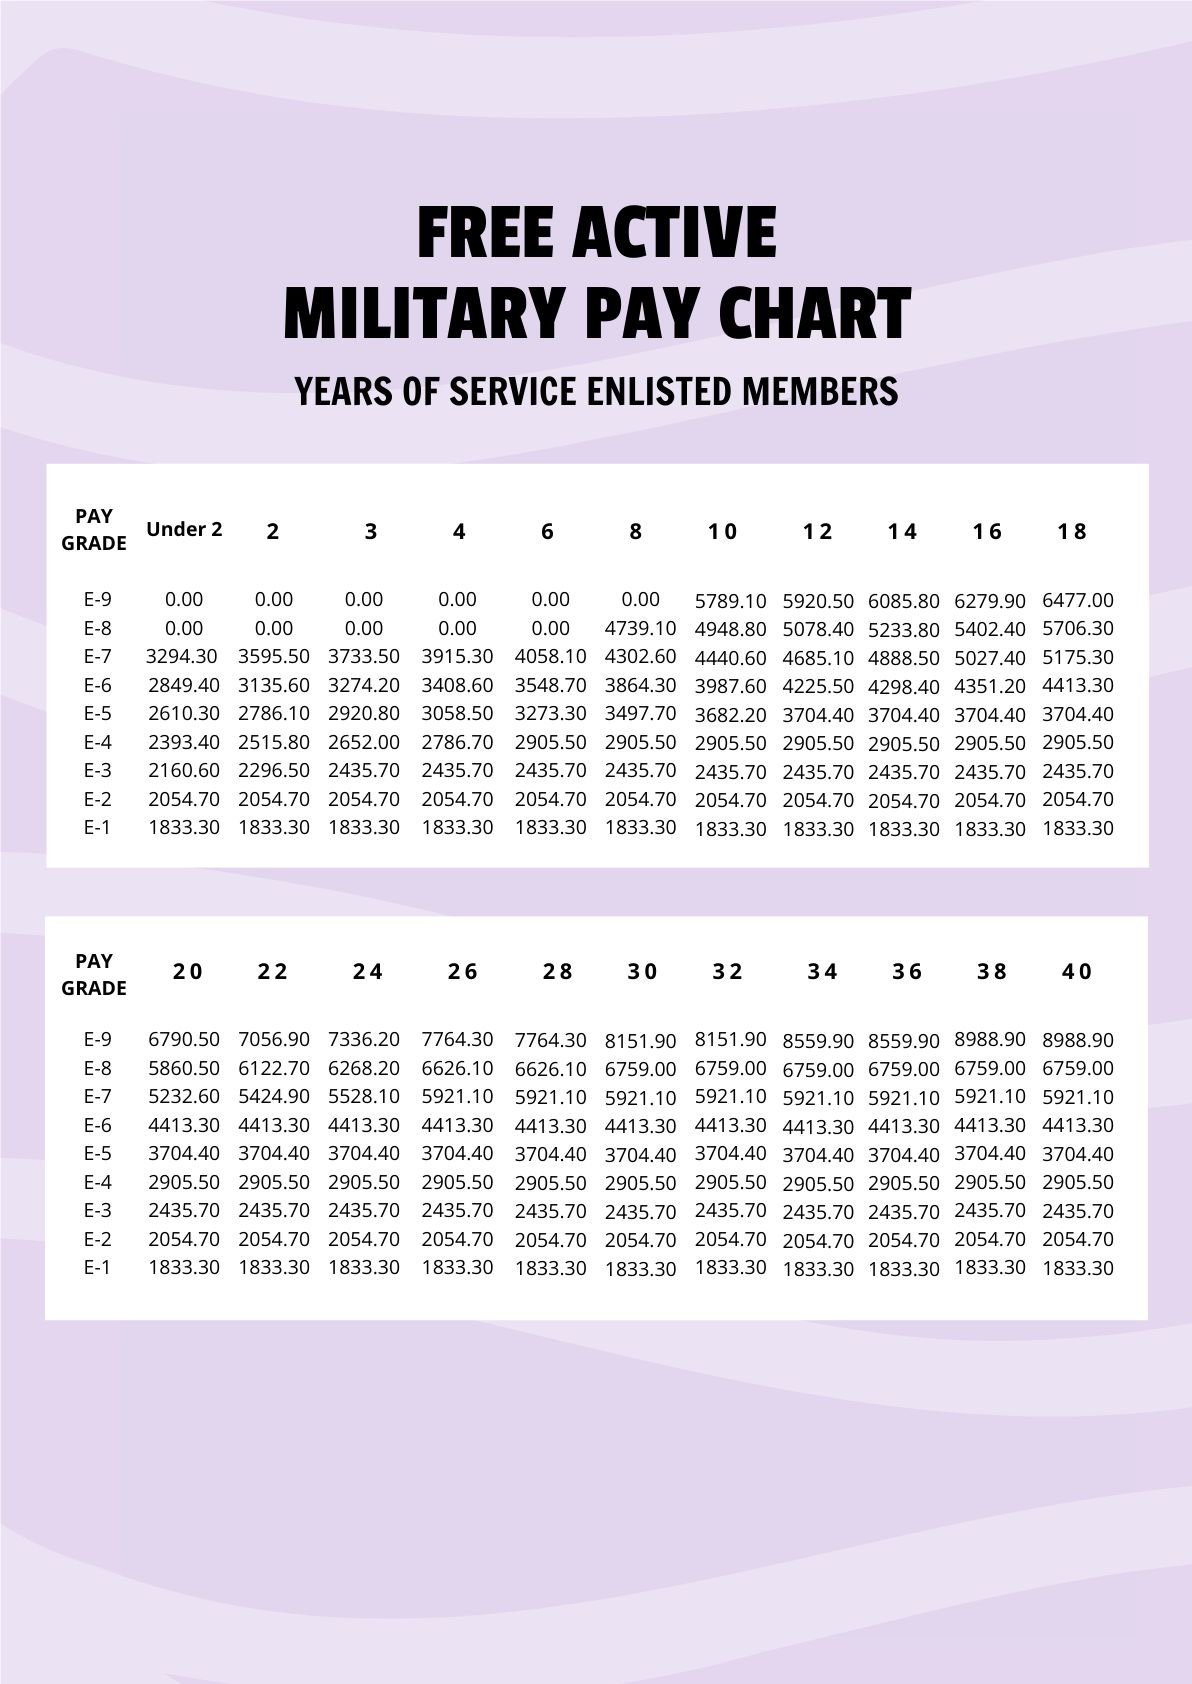 Active Military Pay Chart in PDF